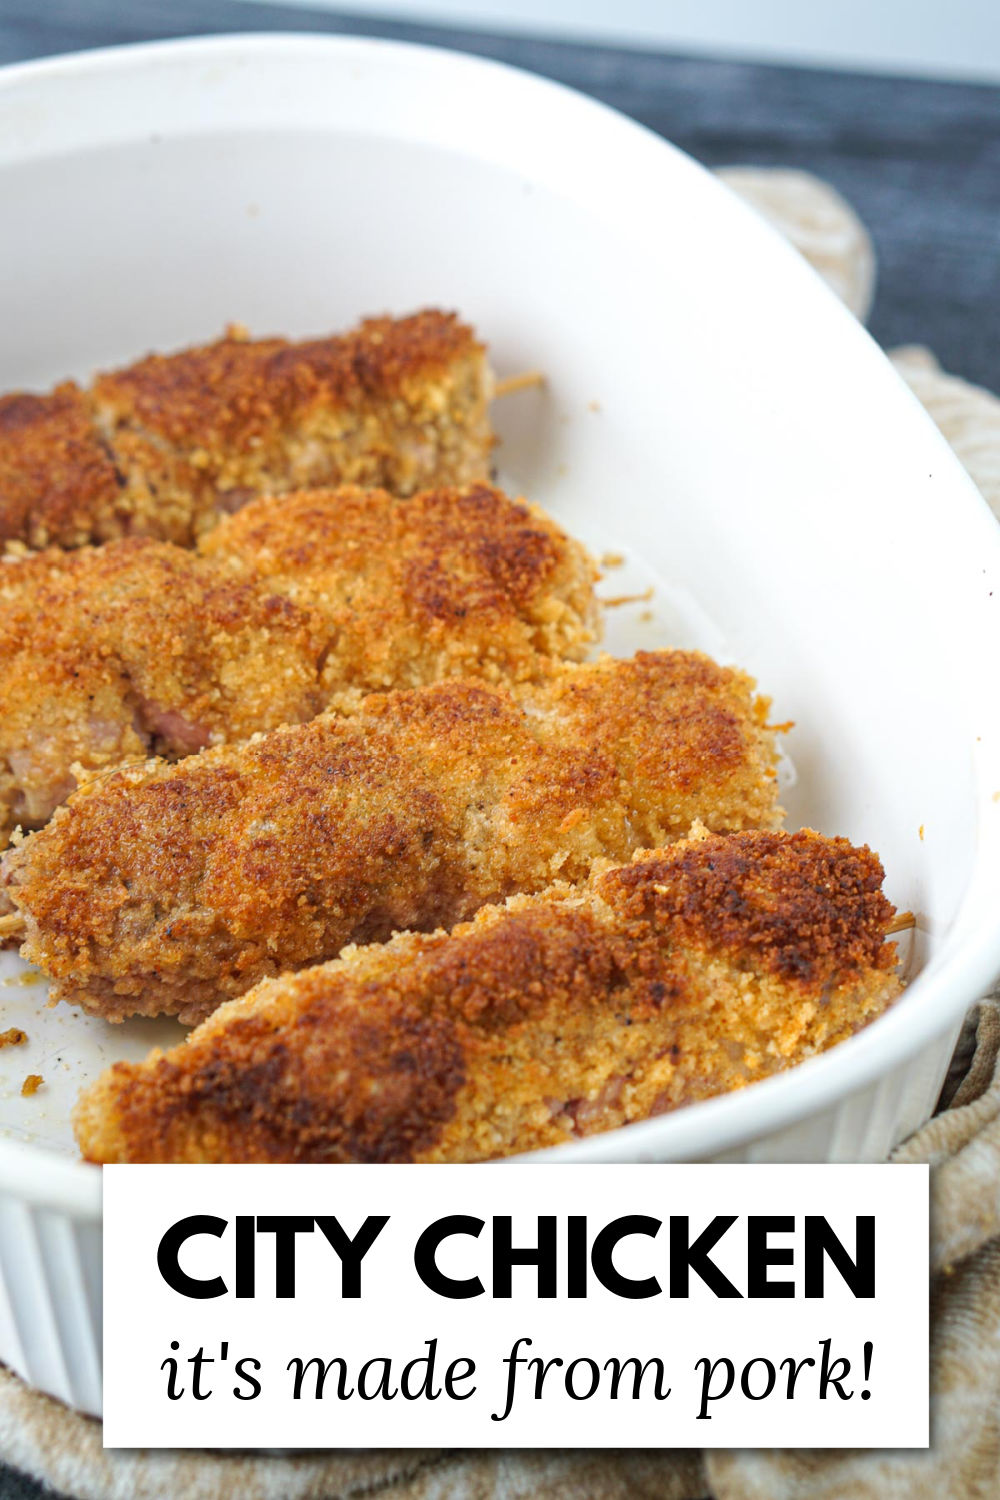 baking dish with breaded city chicken and text